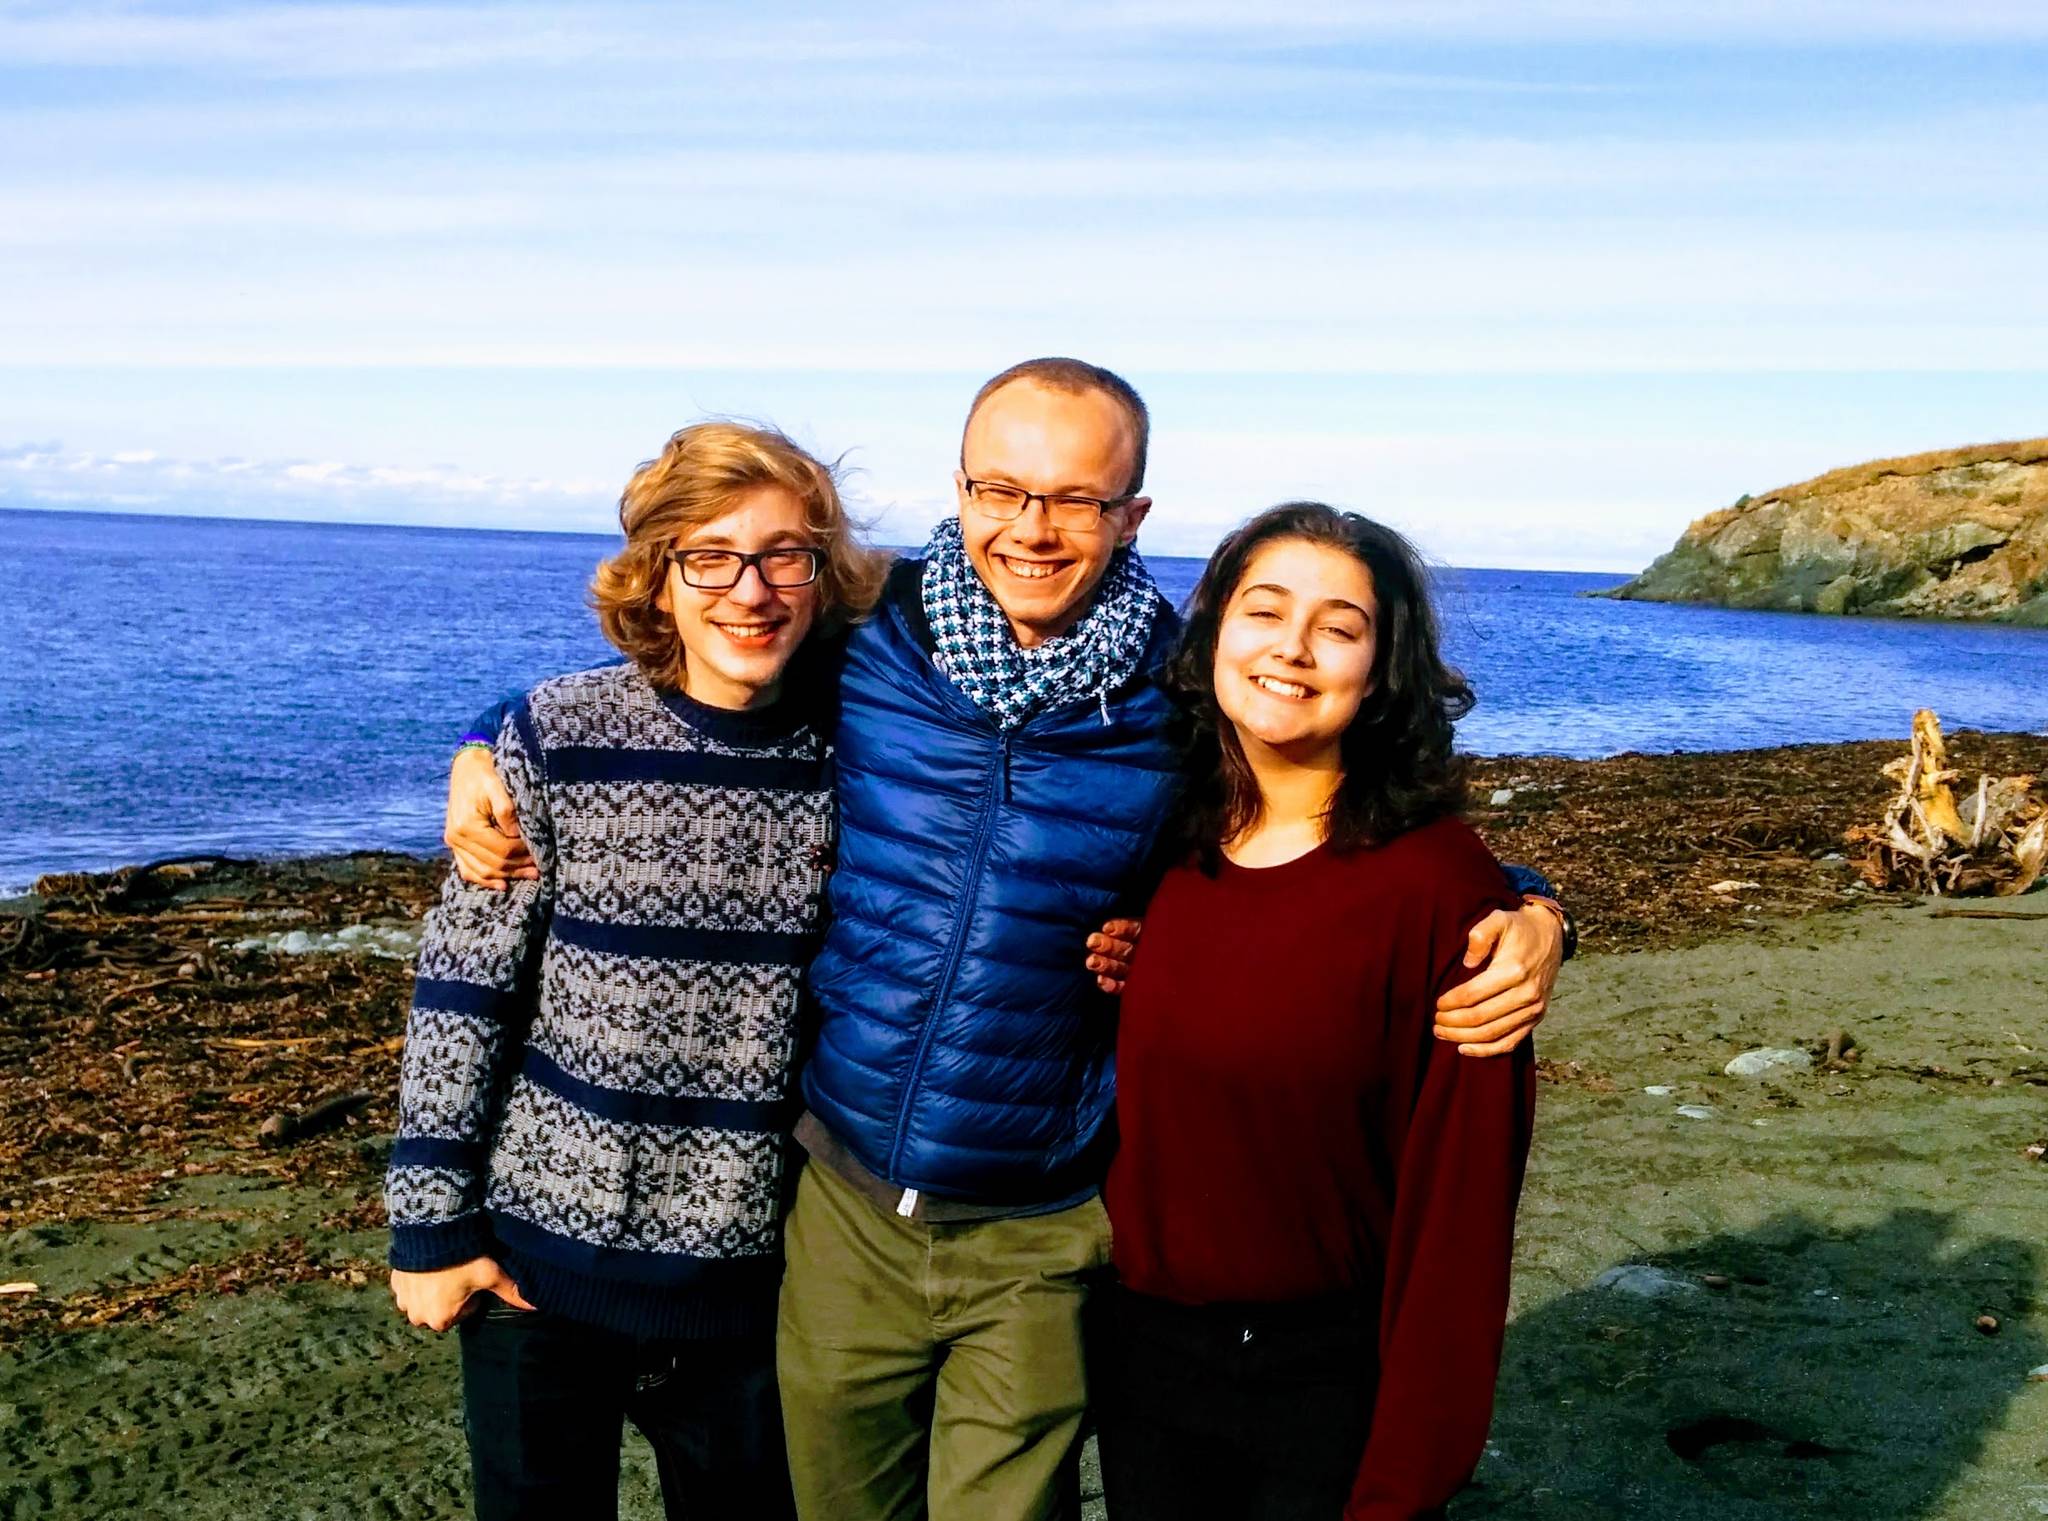 Parker Gibson, left, poses with REC Room staff member Connor Schmidt, center, and Chloë Pleznac, right, at Nanwalek in October 2017. (Photo provided, REC Room)